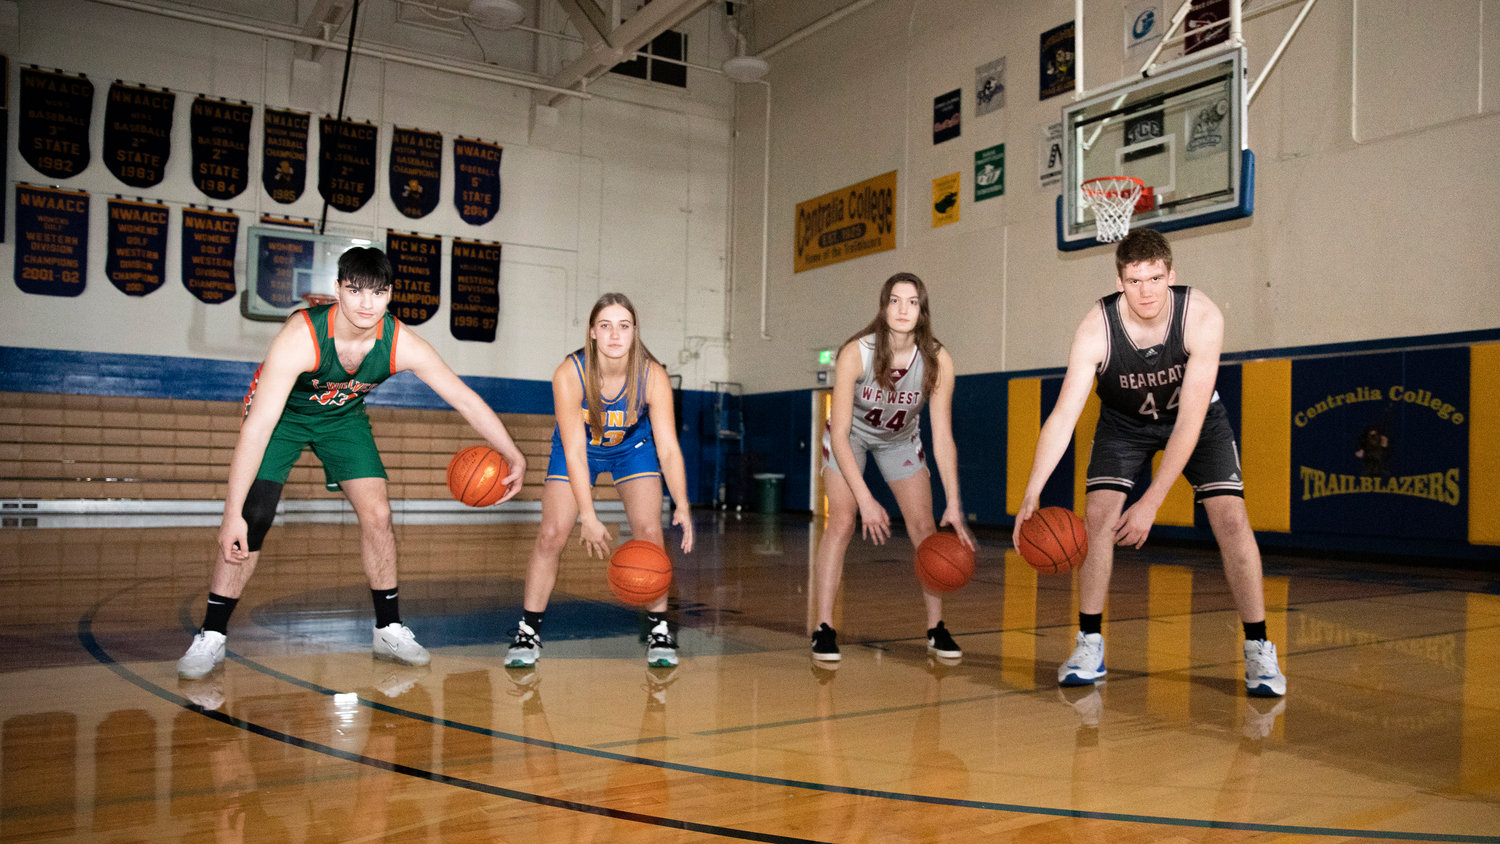 From left, MWP’s Josh Salguero, Adna’s Karlee VonMoos, and W.F. West’s Juila and Soren Dalan dribble basketballs and pose for a photo in the Centralia College gymnasium on Tuesday.